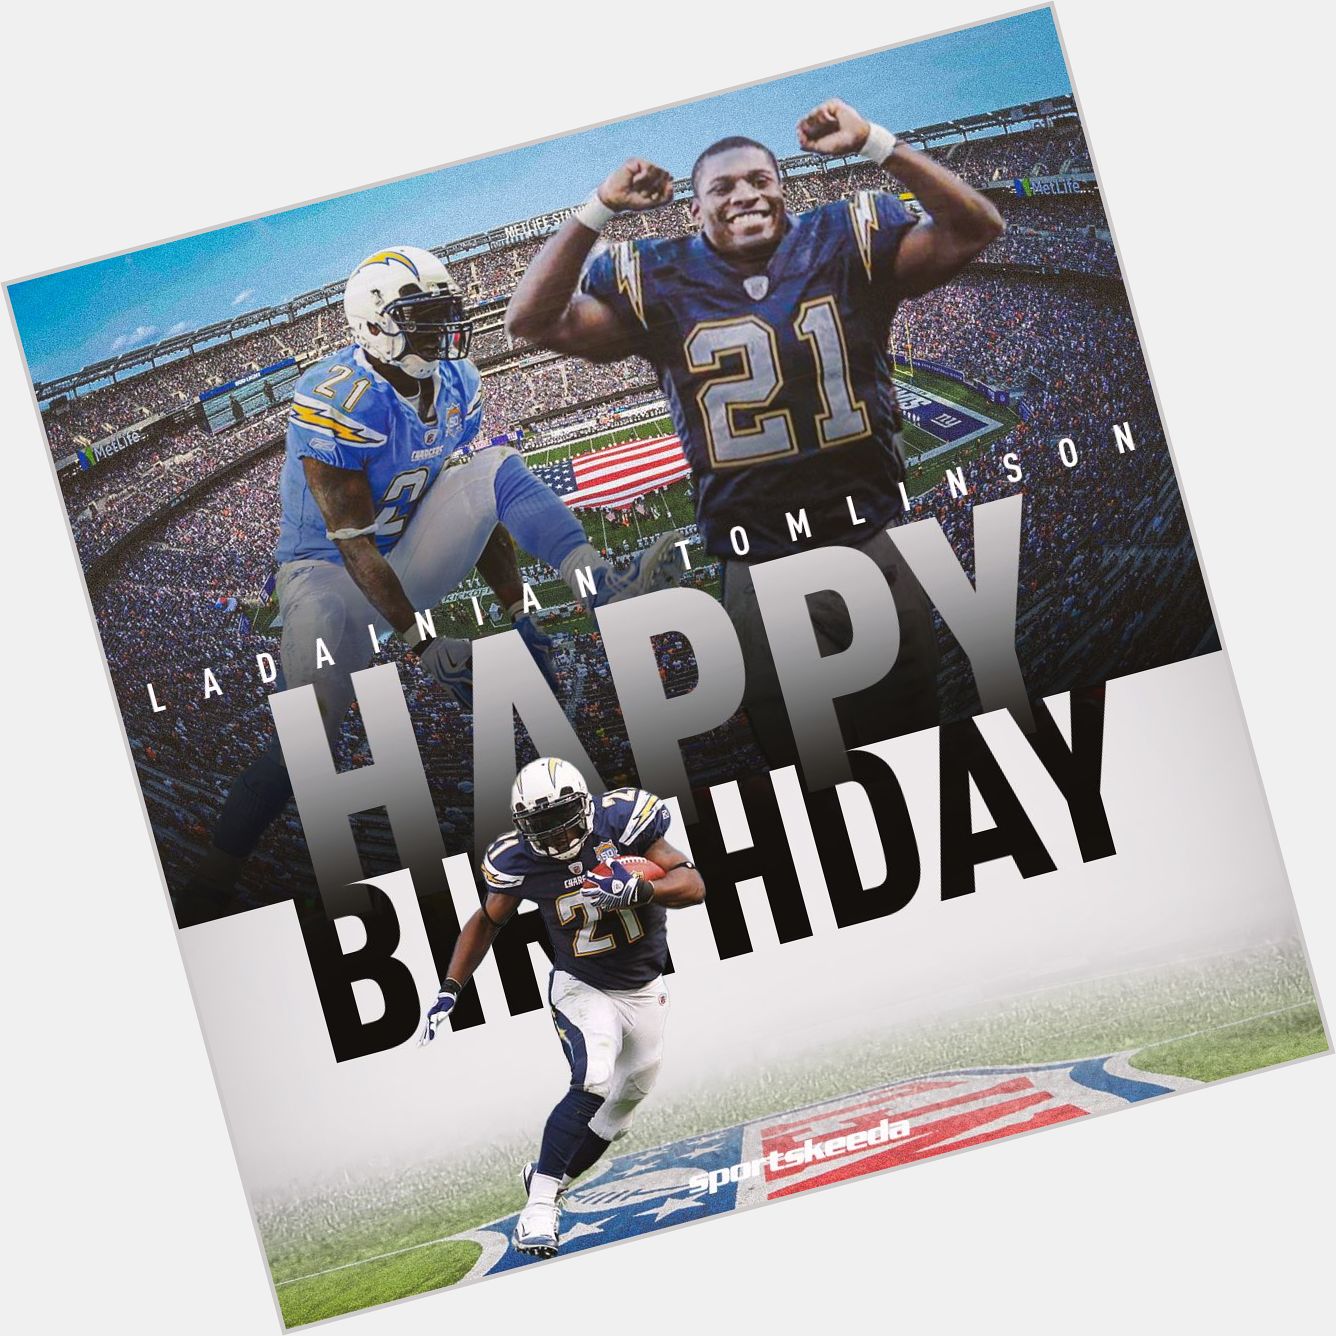 Happy 44th birthday to former MVP and all-around legend, LaDainian Tomlinson  